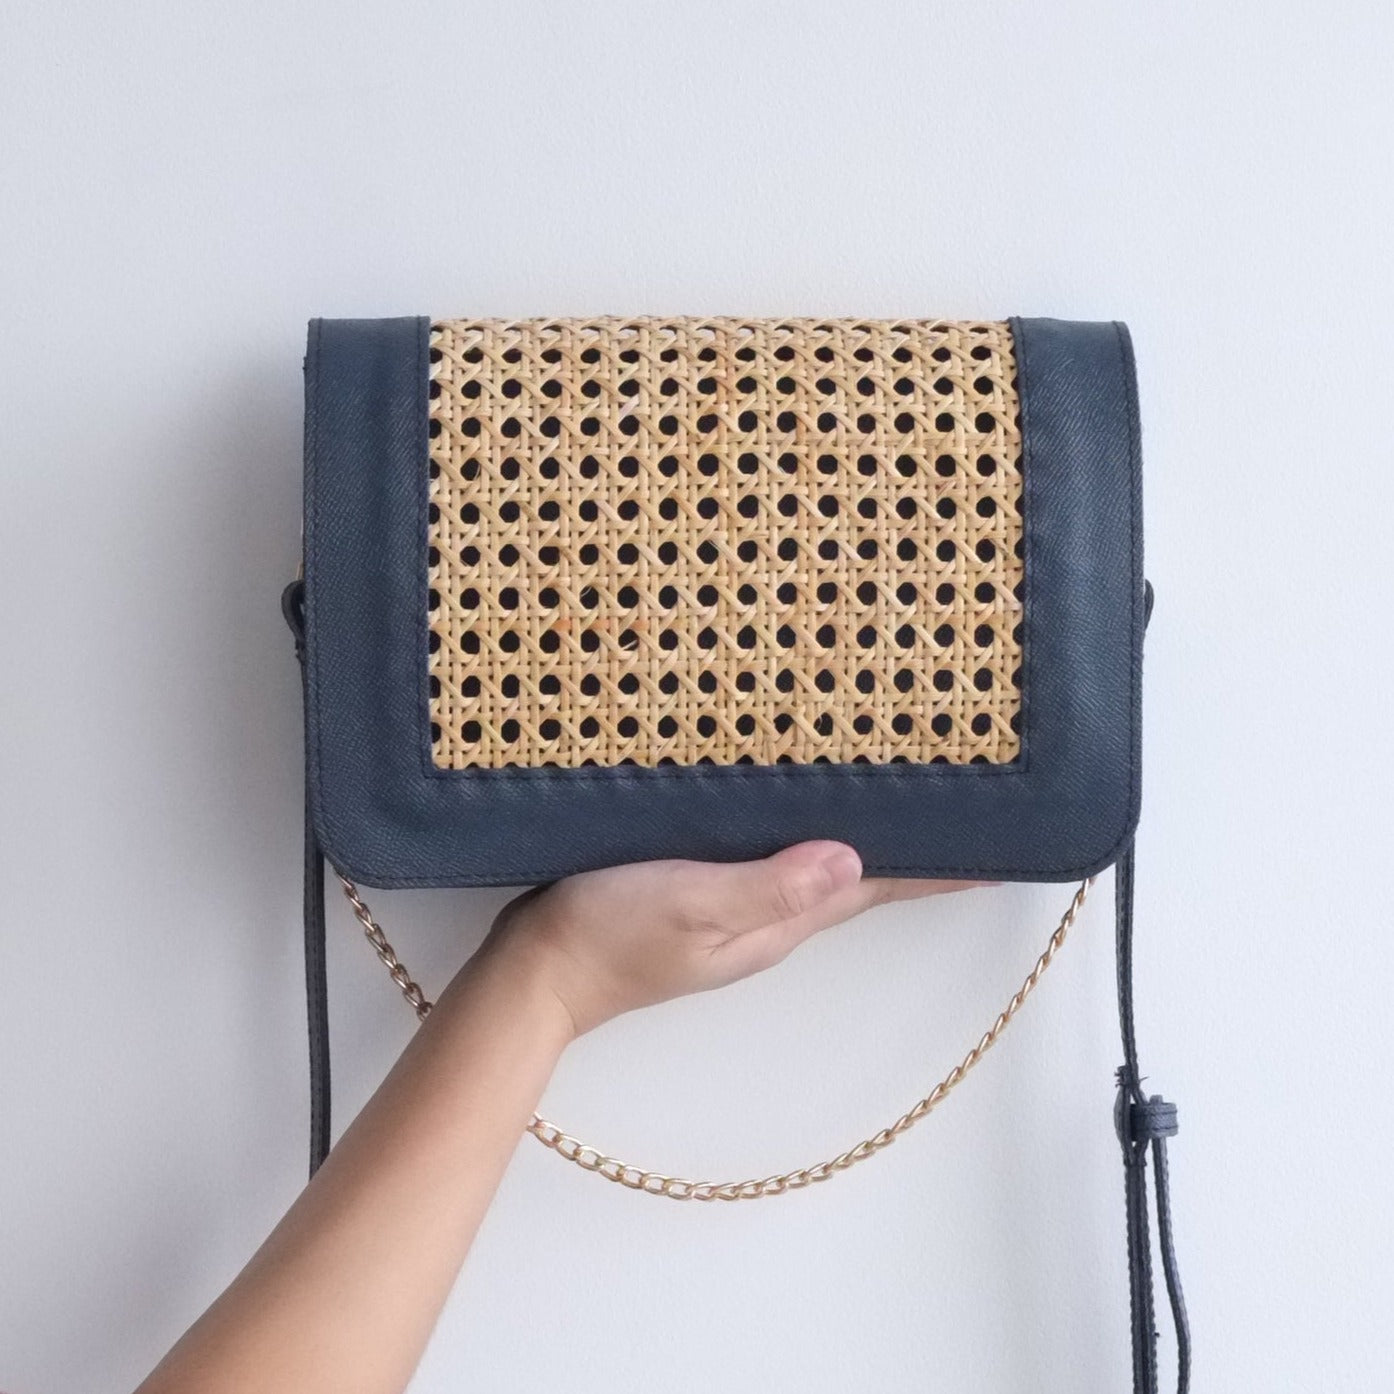 Finally, a Small Studded Bucket Crossbody Bag That Isn't Too Boring… -  Vicenzo Leather